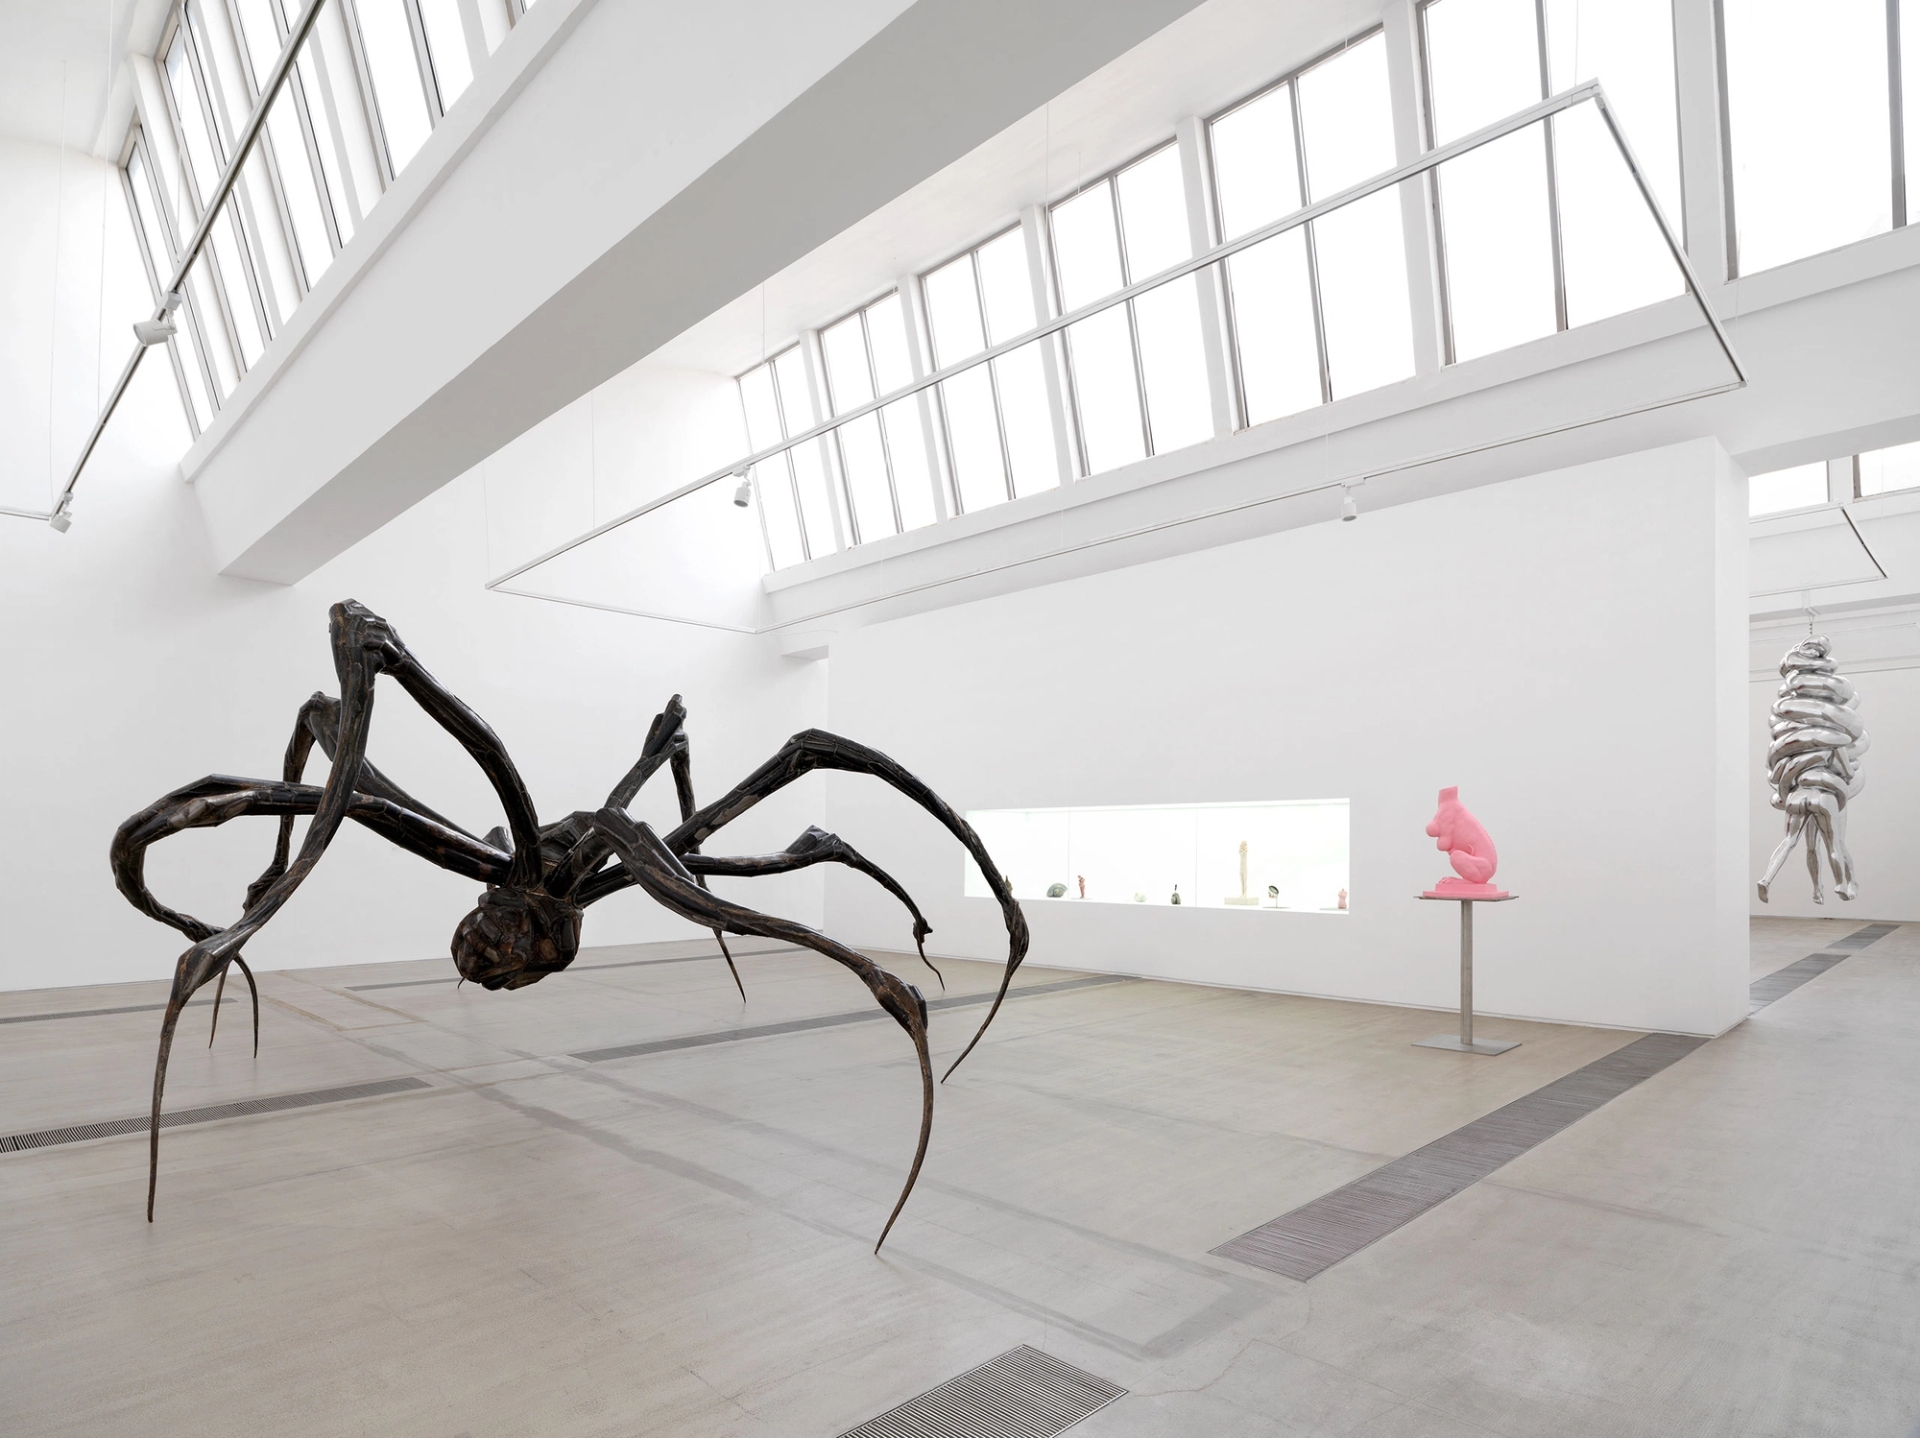 Louise Bourgeois: Alone and together